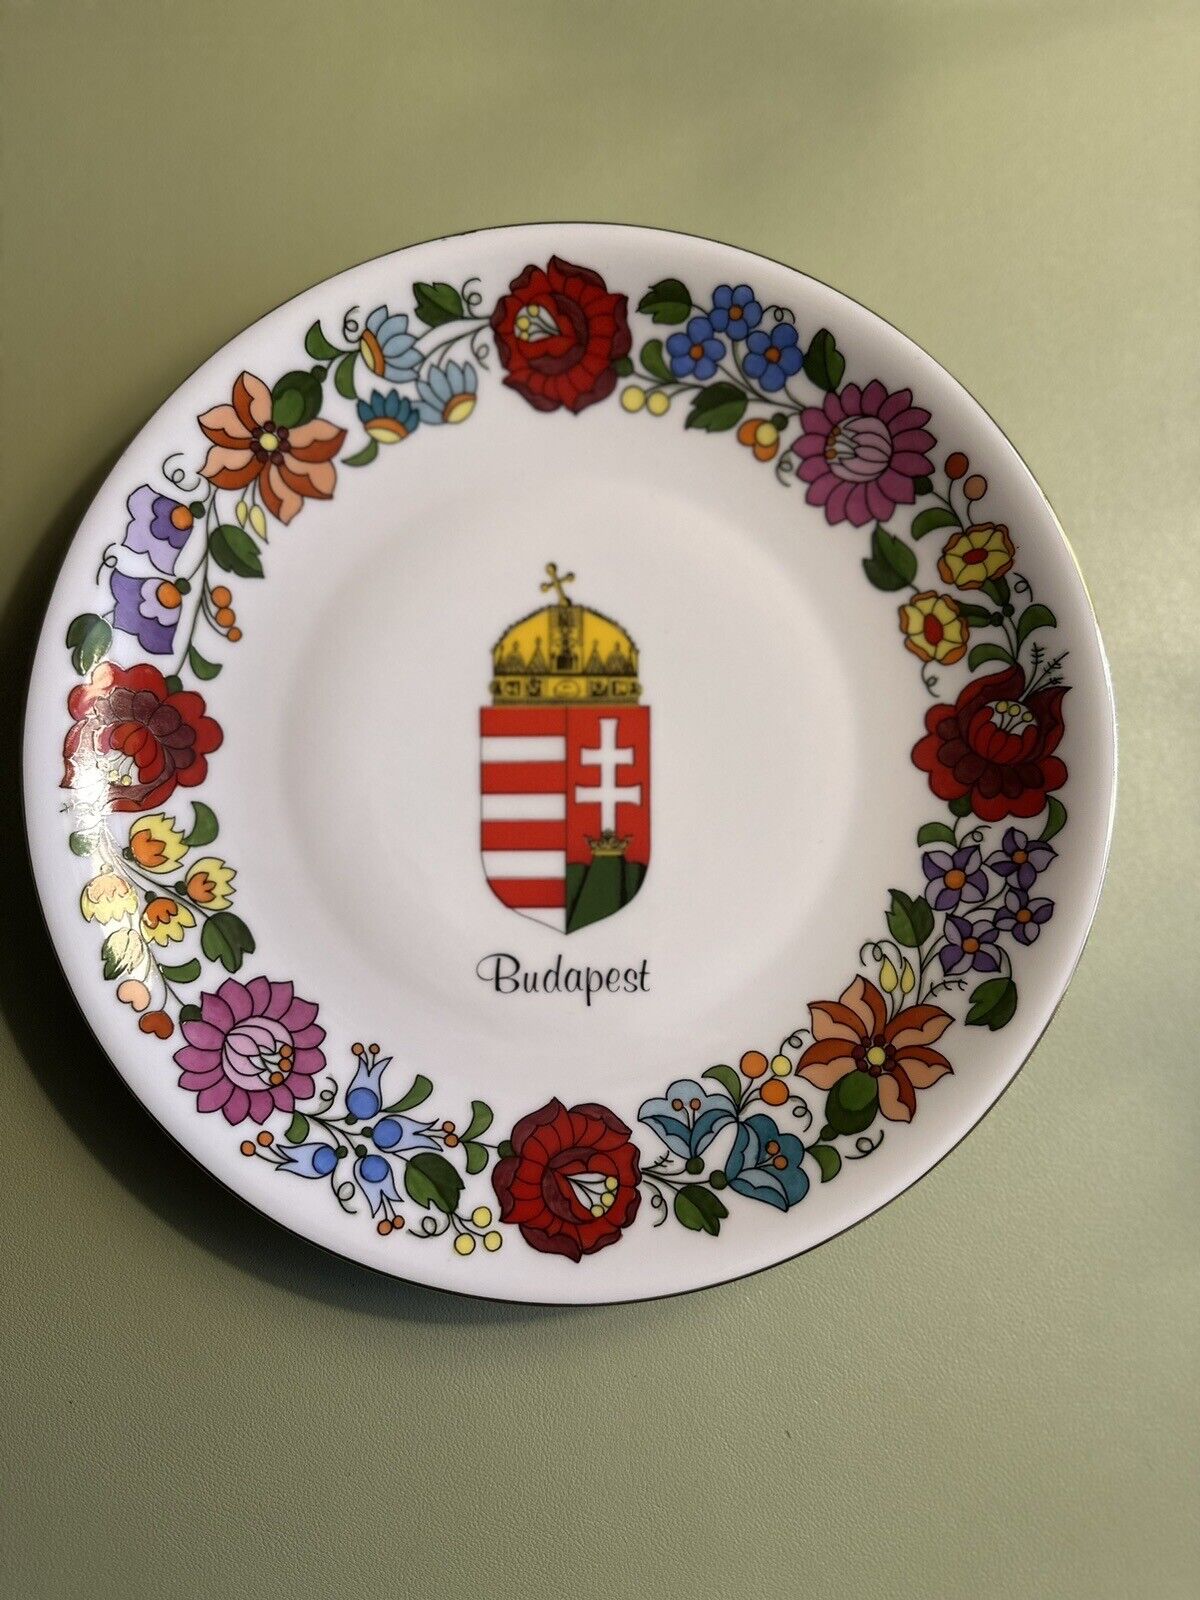 Kalocsa Hungary Handpainted Decorative Plate With Budapest/Crown